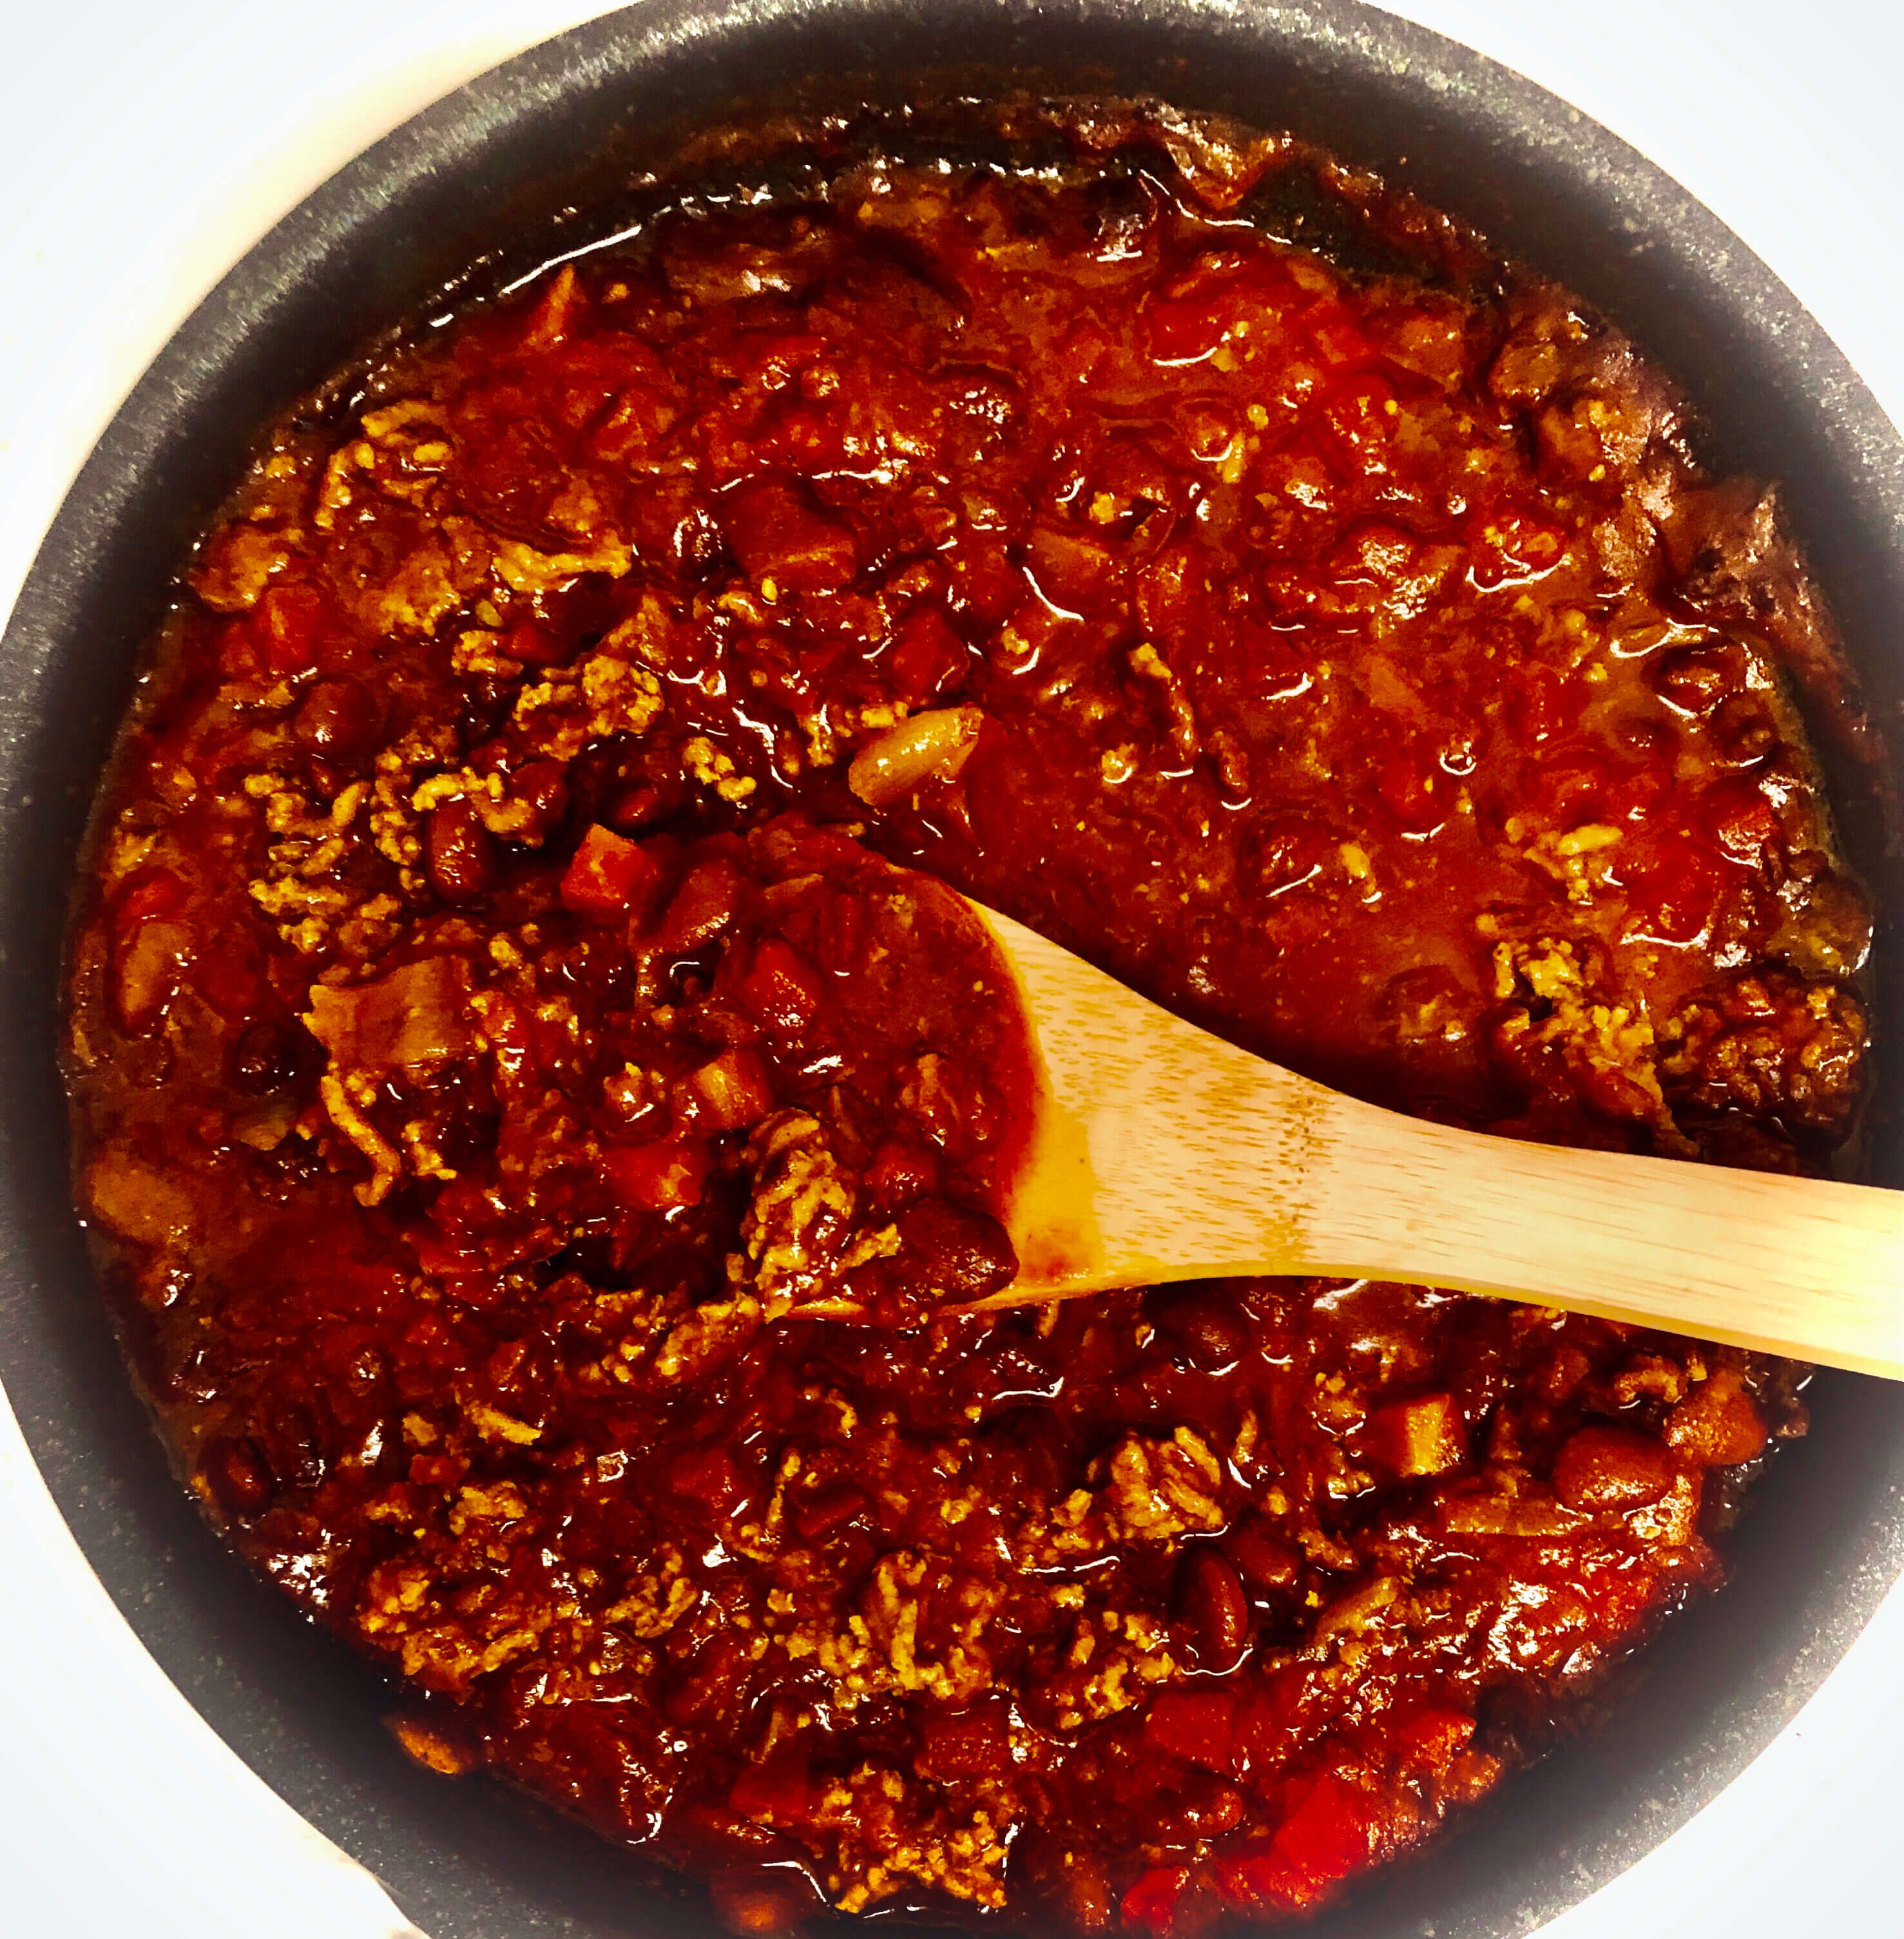 A batch of homemade Chili Con Carne cooked in a skillet with a wooden spoon on a cold winter day in a Hoboken, New Jersey apartment.